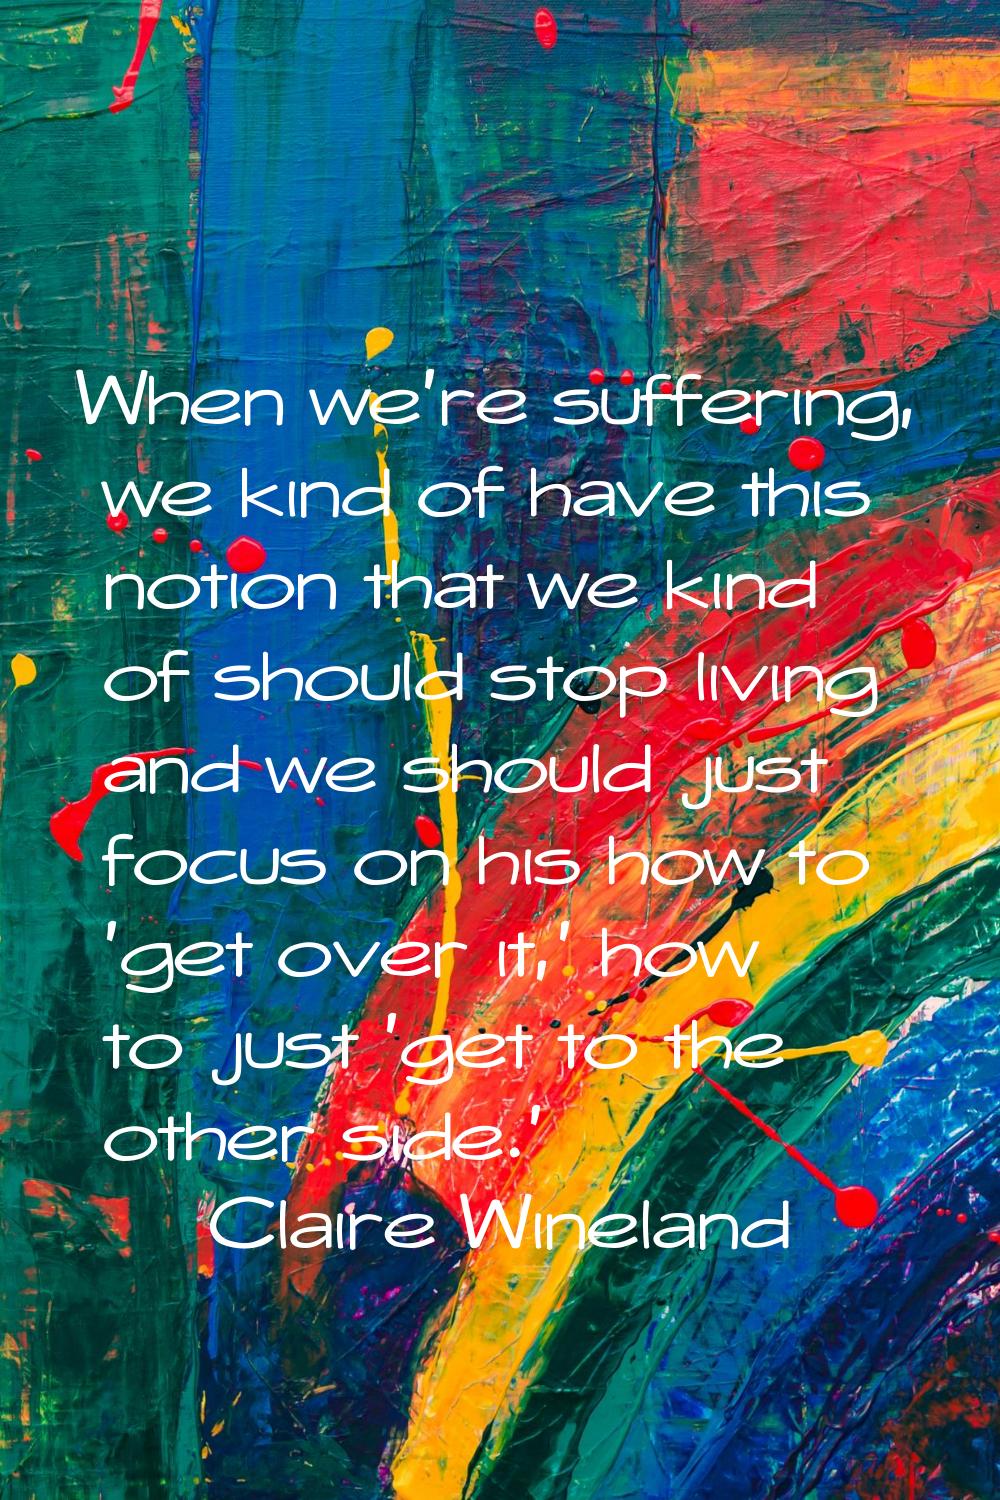 When we're suffering, we kind of have this notion that we kind of should stop living and we should 